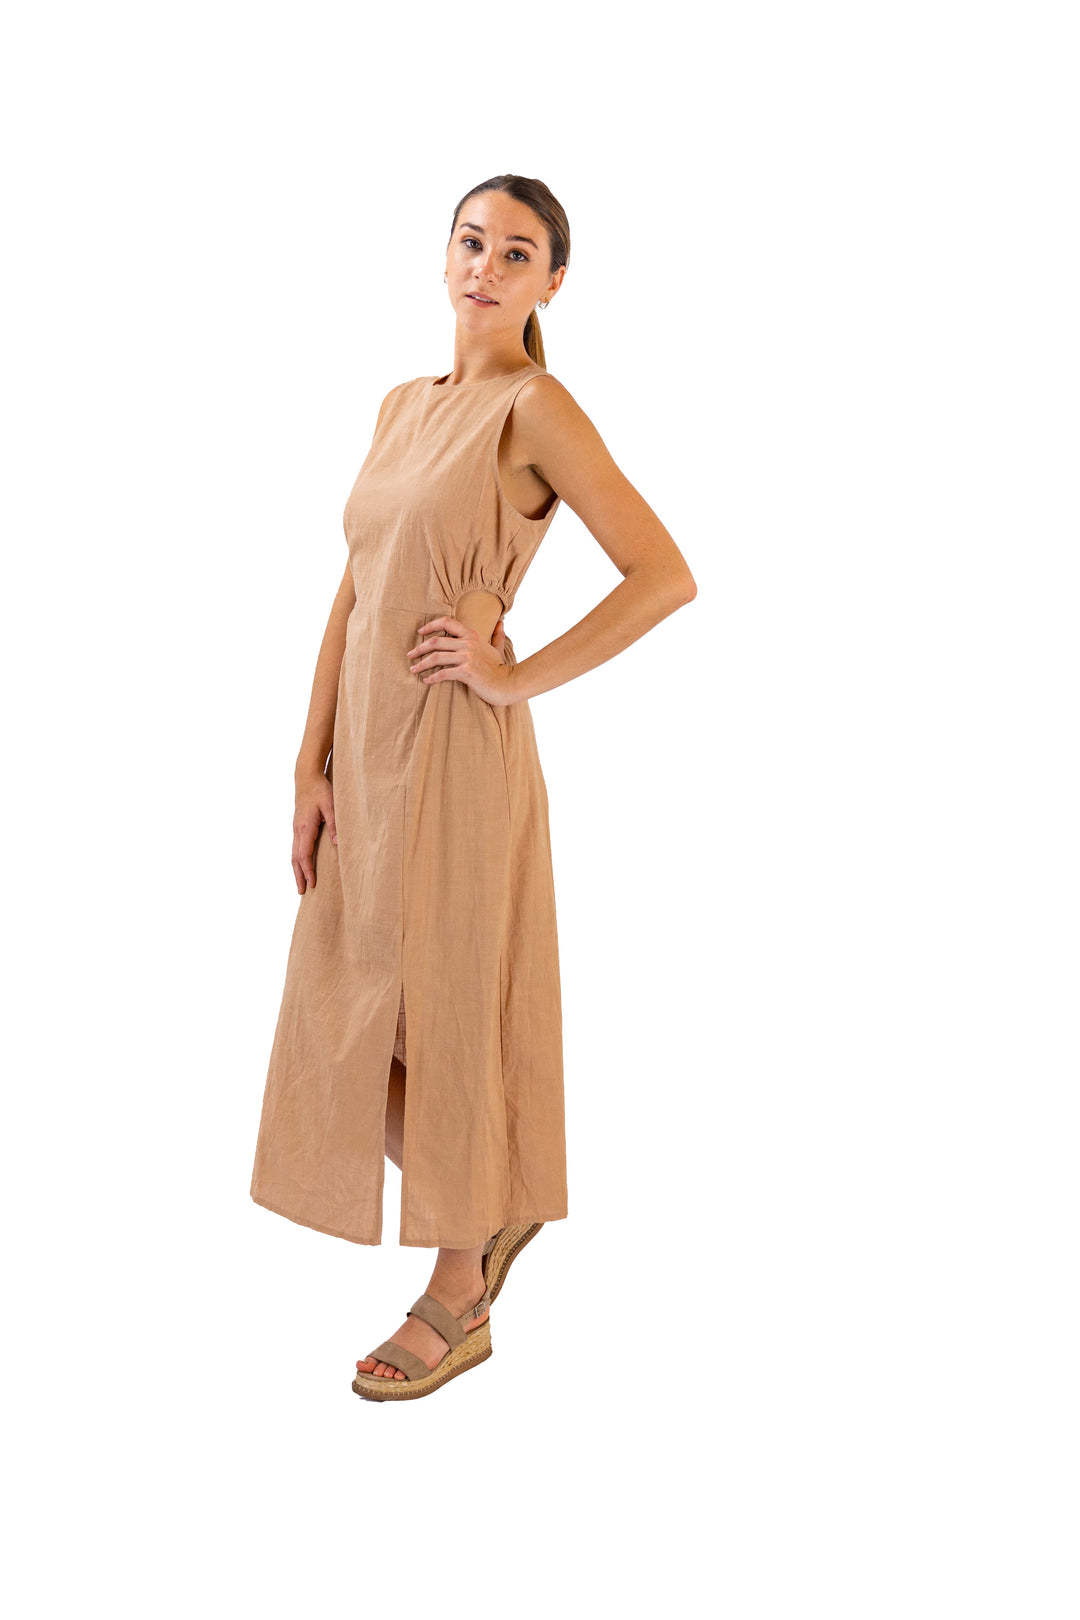 Fabonics Chic Earthy Brown Sleeveless Midi Dress - Elegant and Versatile for Any Occasion